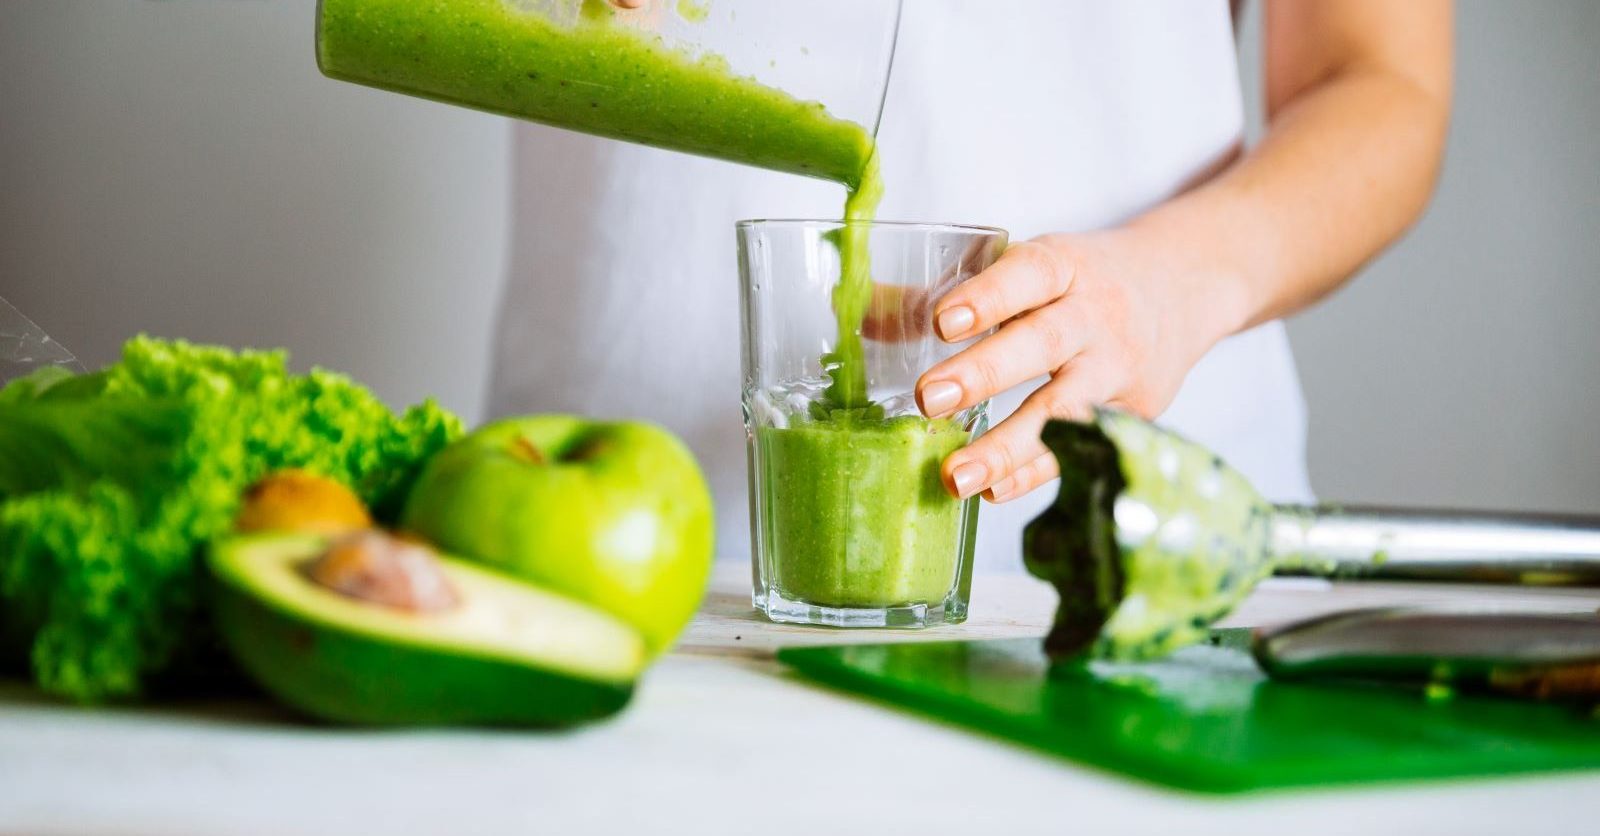 4 Good reasons to Rethink Your New Year’s Cleanse or Detox